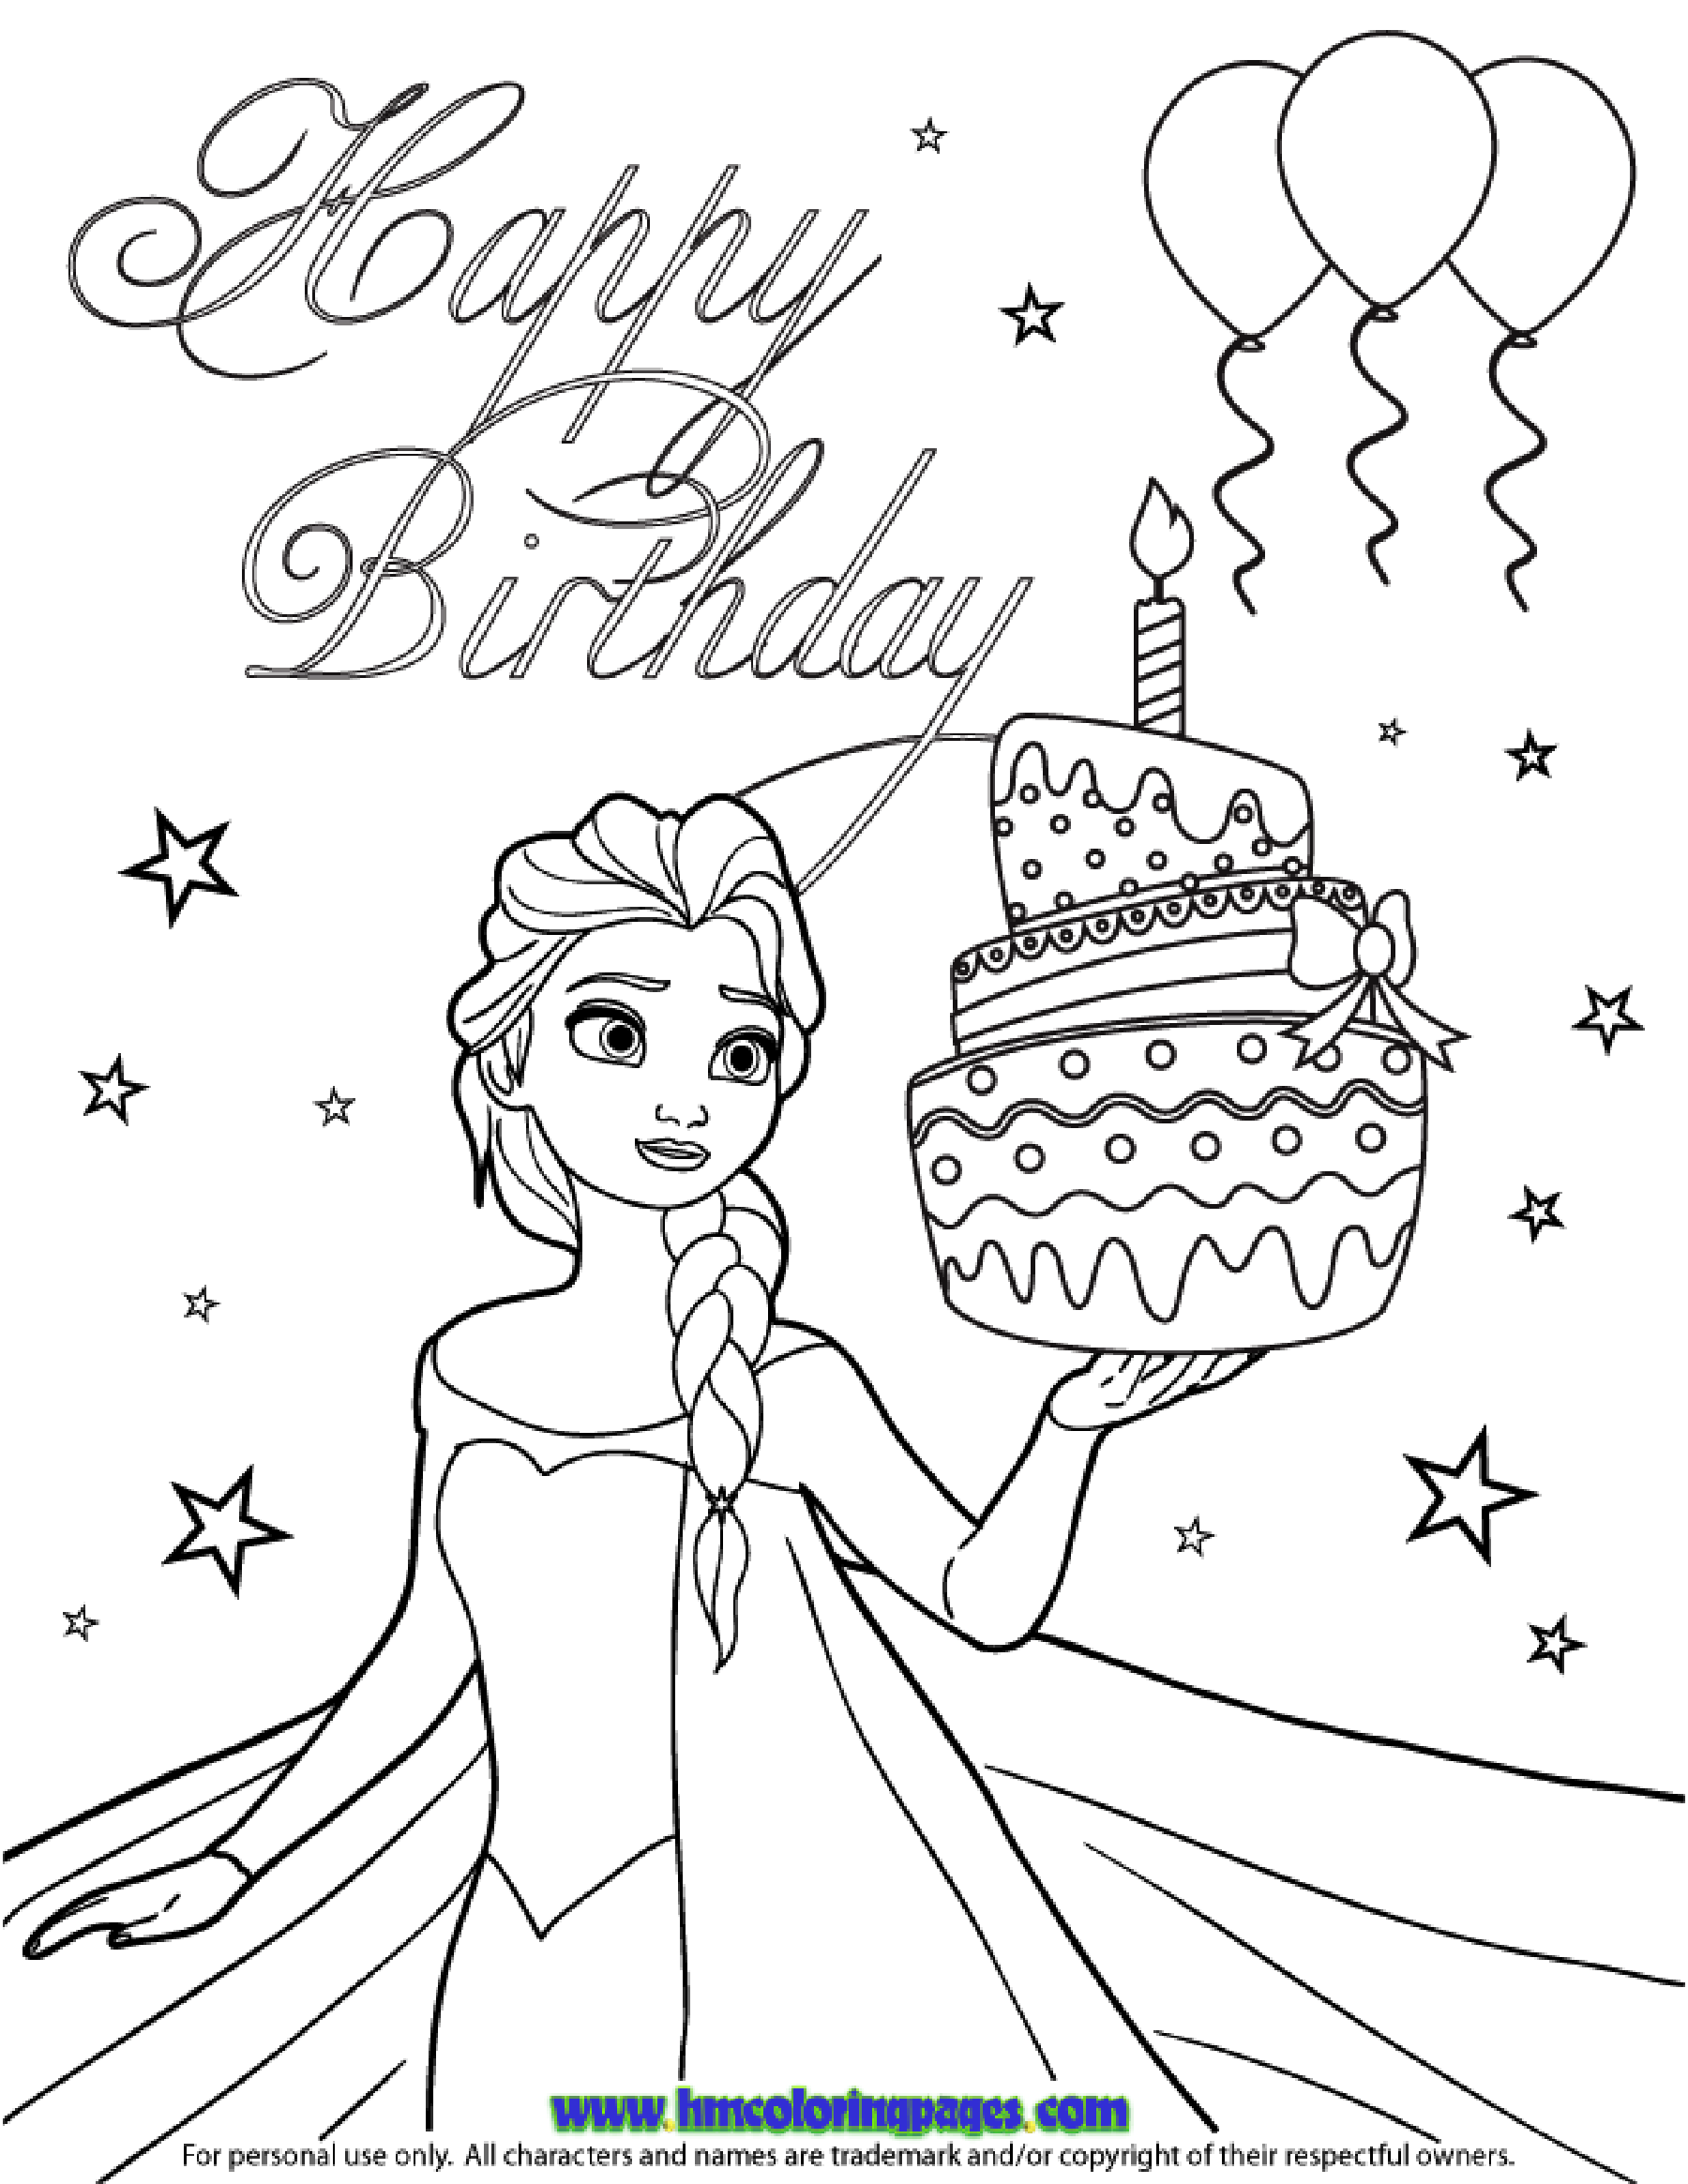 Download Frozen to color for children - Frozen Kids Coloring Pages